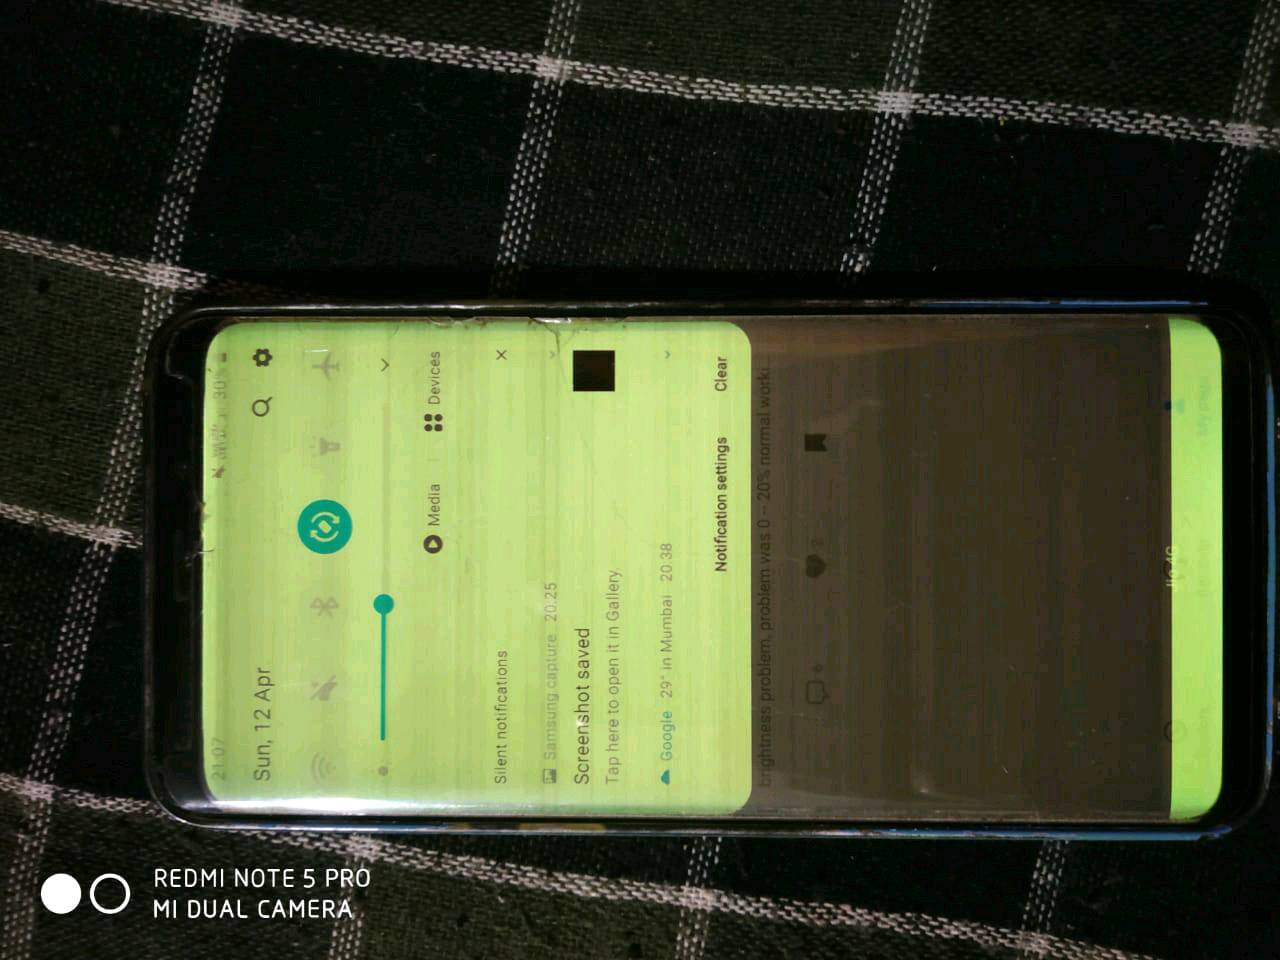 s9 plus or note 9 screen flickering problem after ... - Samsung Members